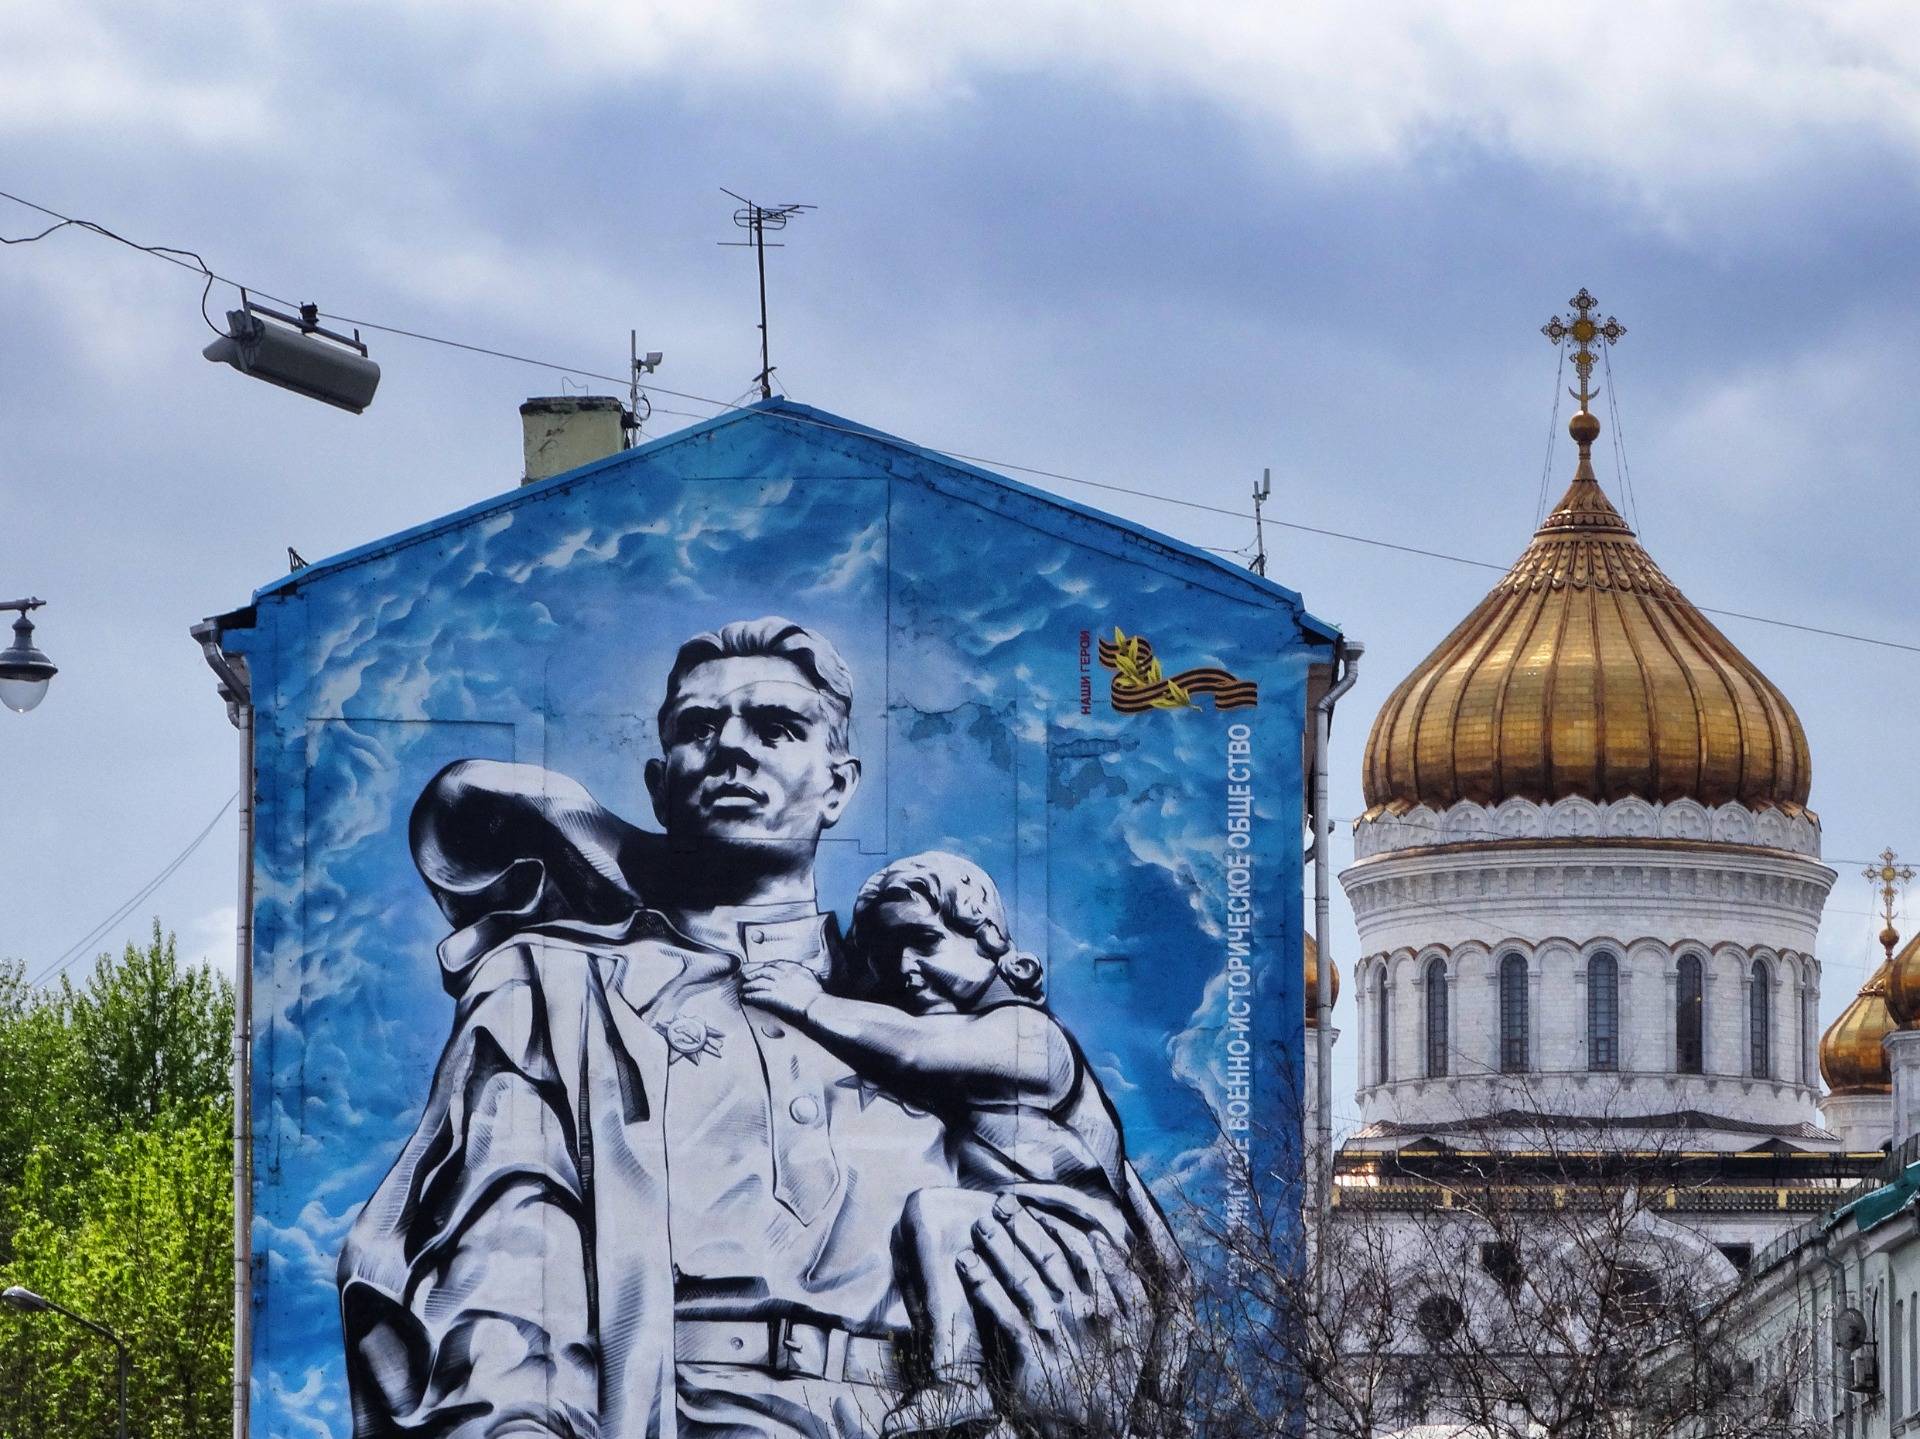 Moscow: Full of signs of forgotten times